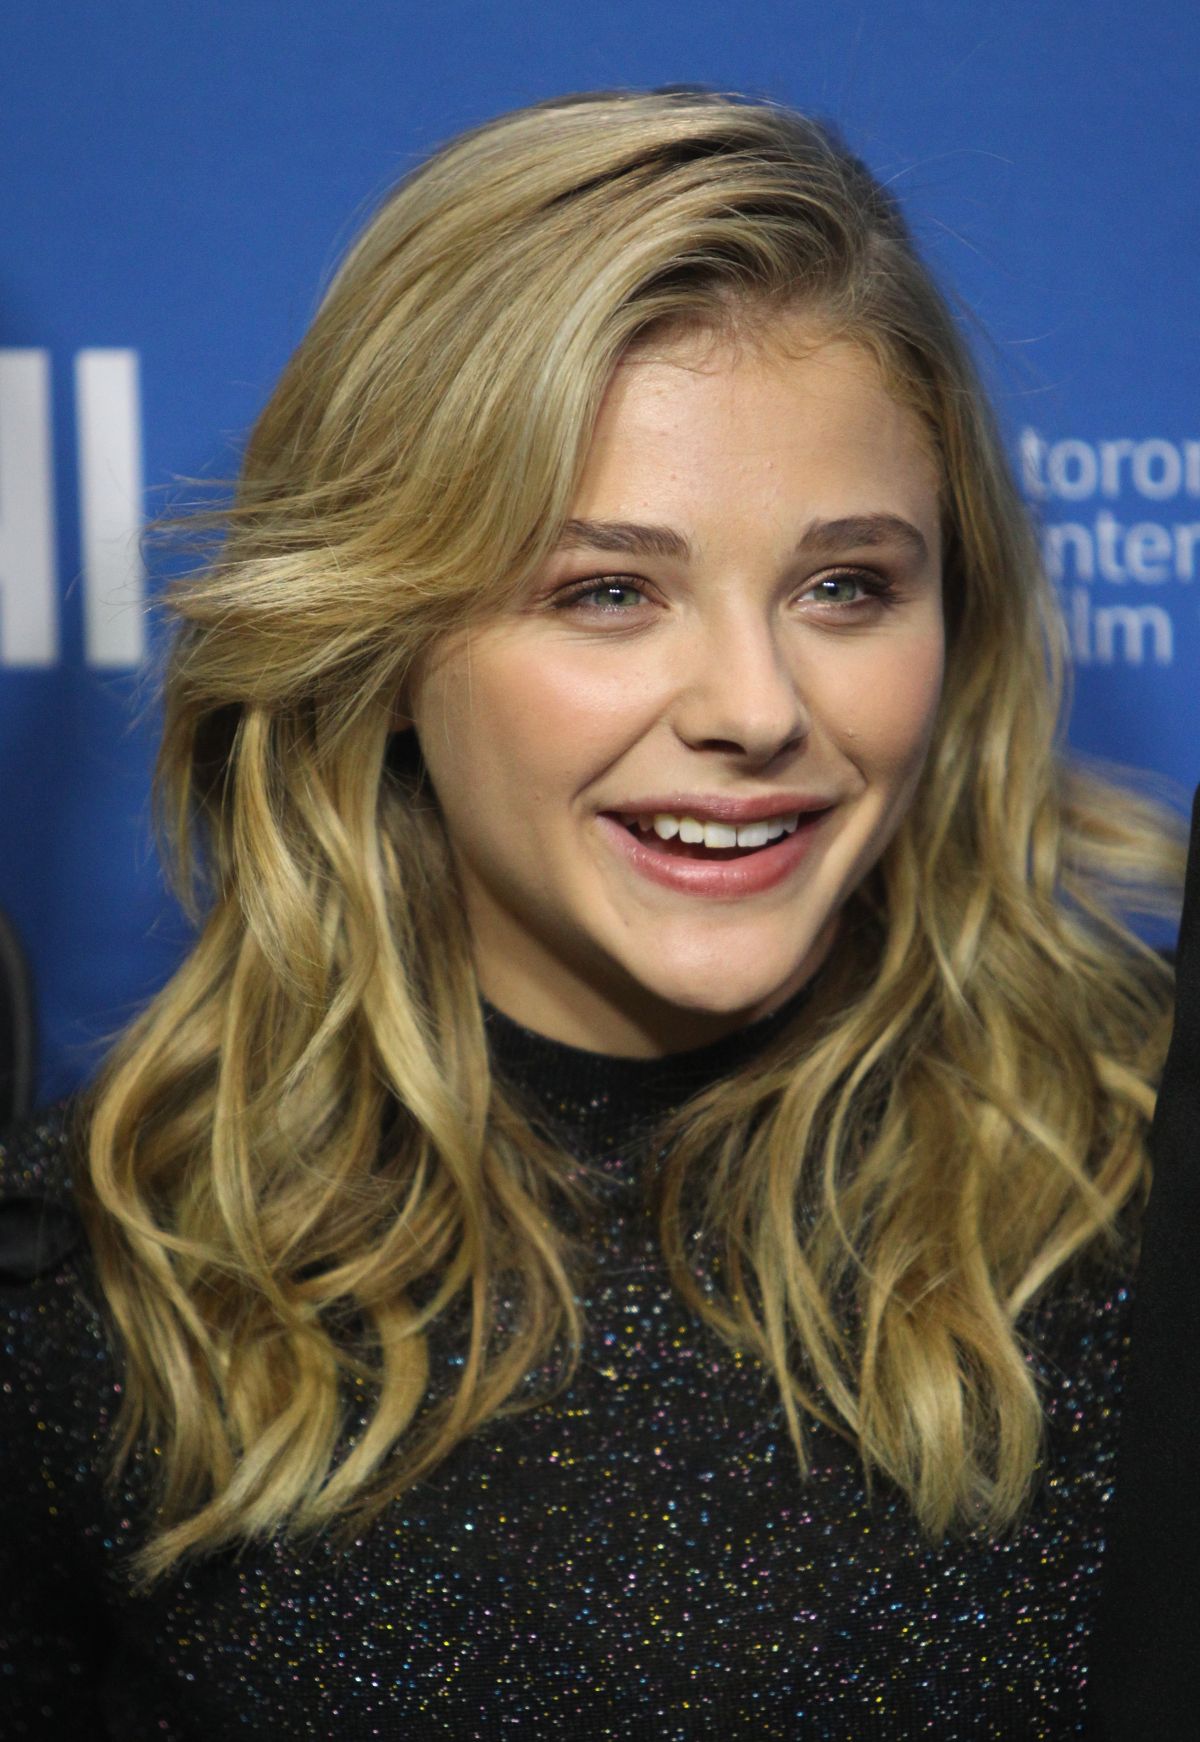 CHLOE MORETZ at The Equalizer Press Conference in Toronto - HawtCelebs1200 x 1742